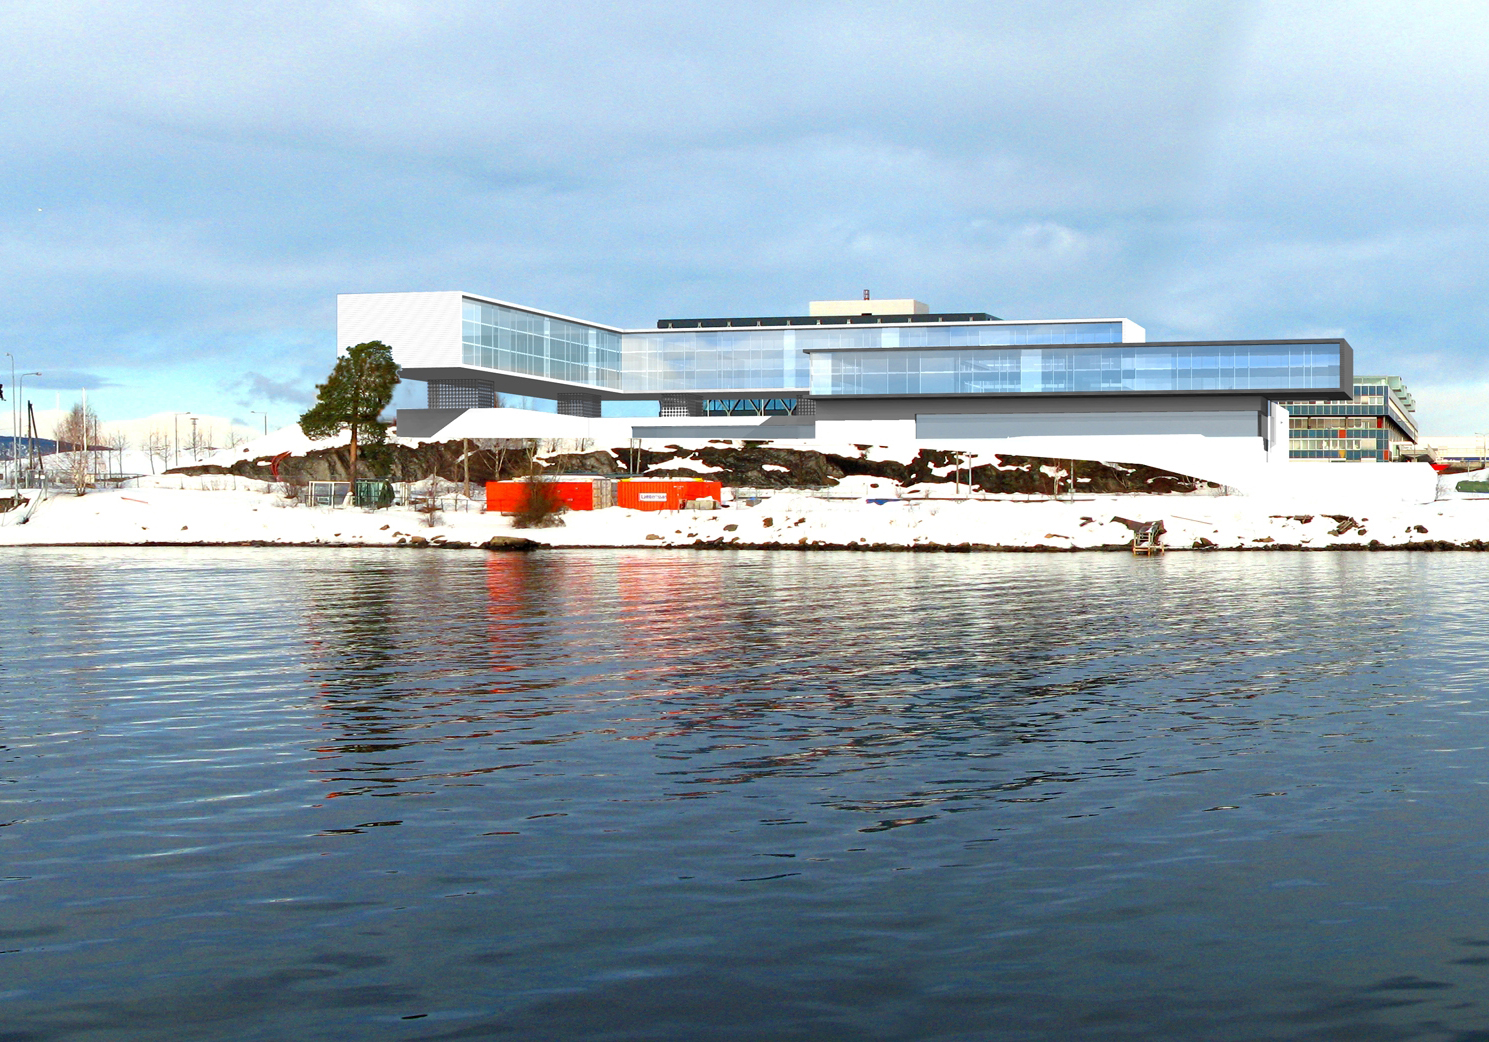 Scandic signs up for another hotel in Oslo